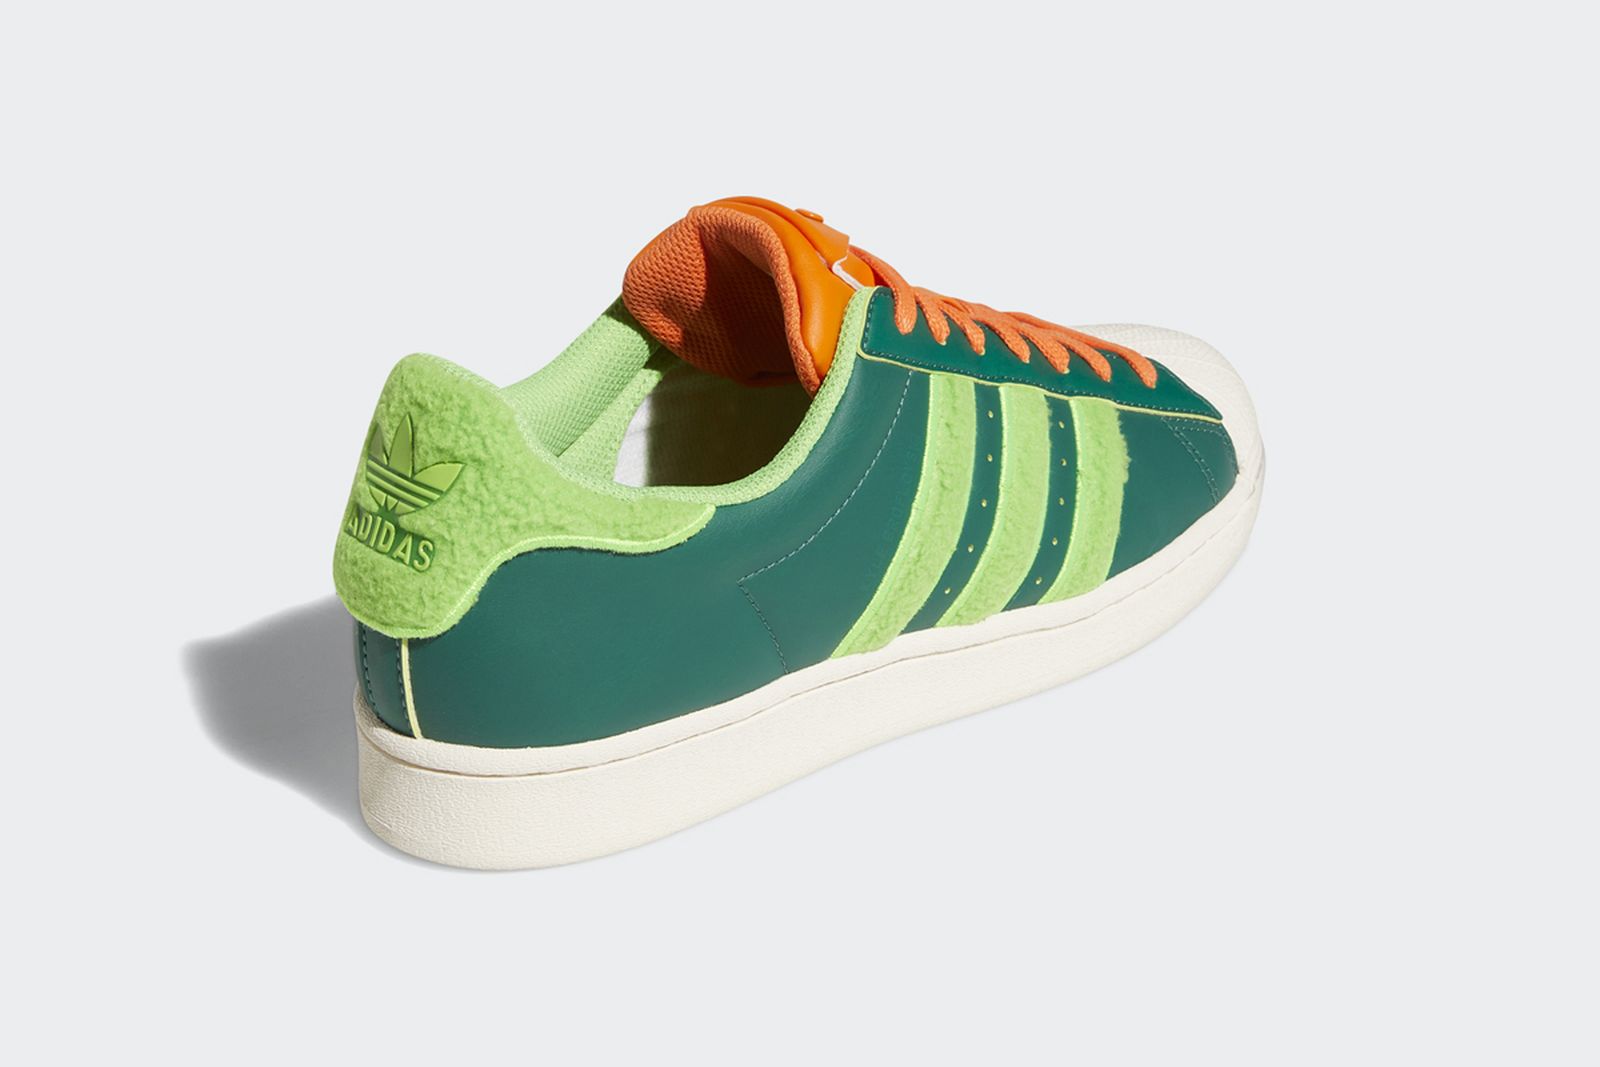 south-park-adidas-shoes-release-date-collection (40)